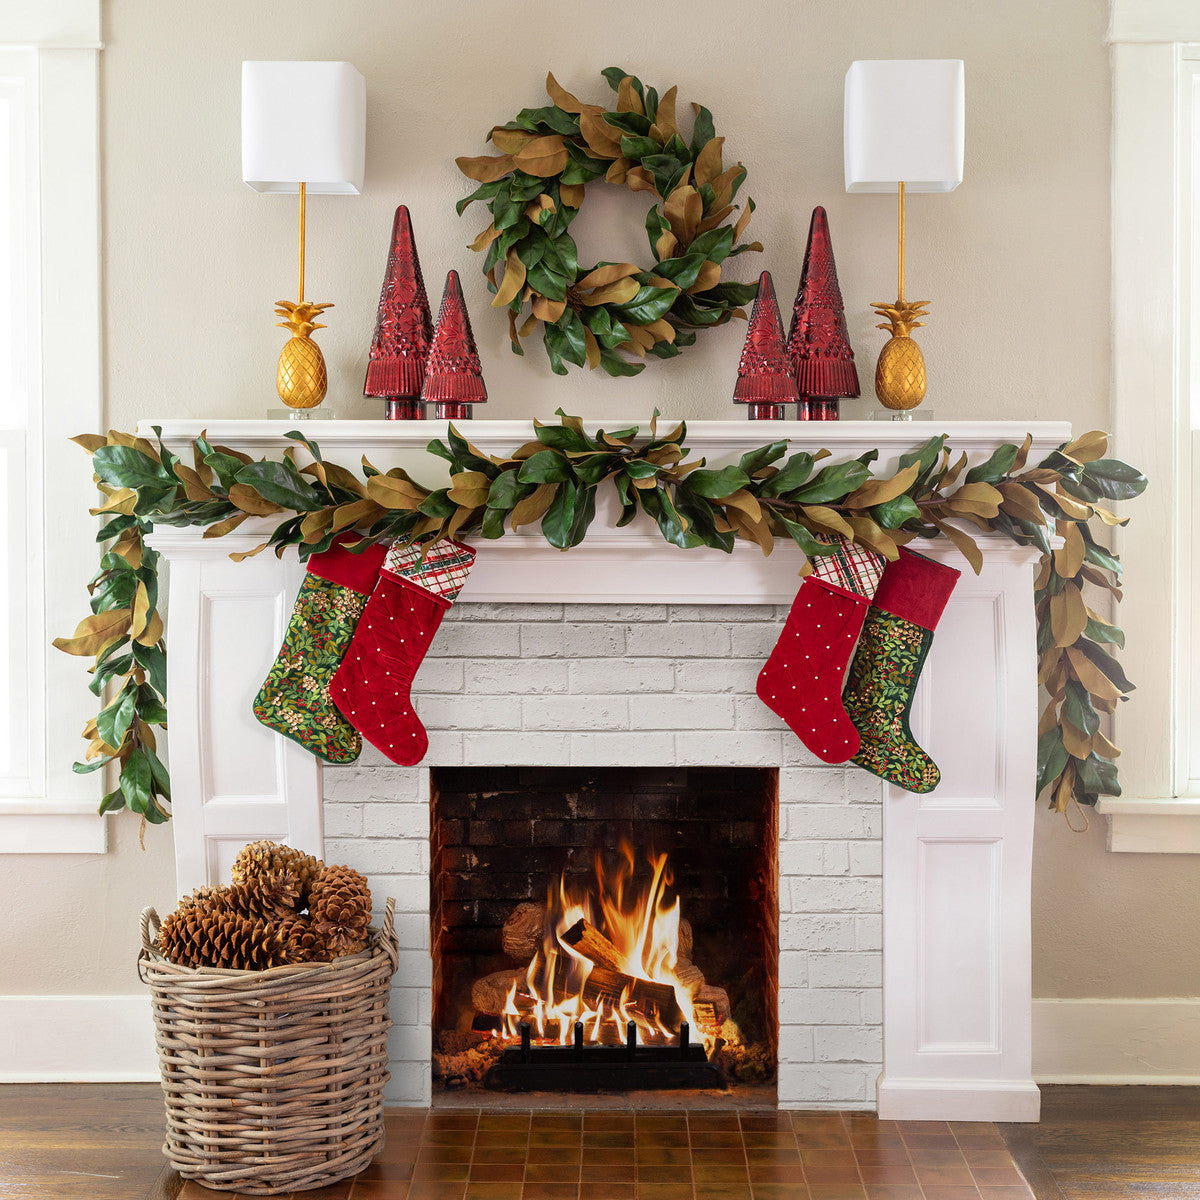 handwoven rattan floor basket with pine cones white mantle fireplace magnolia garland wreath and red and green stockings